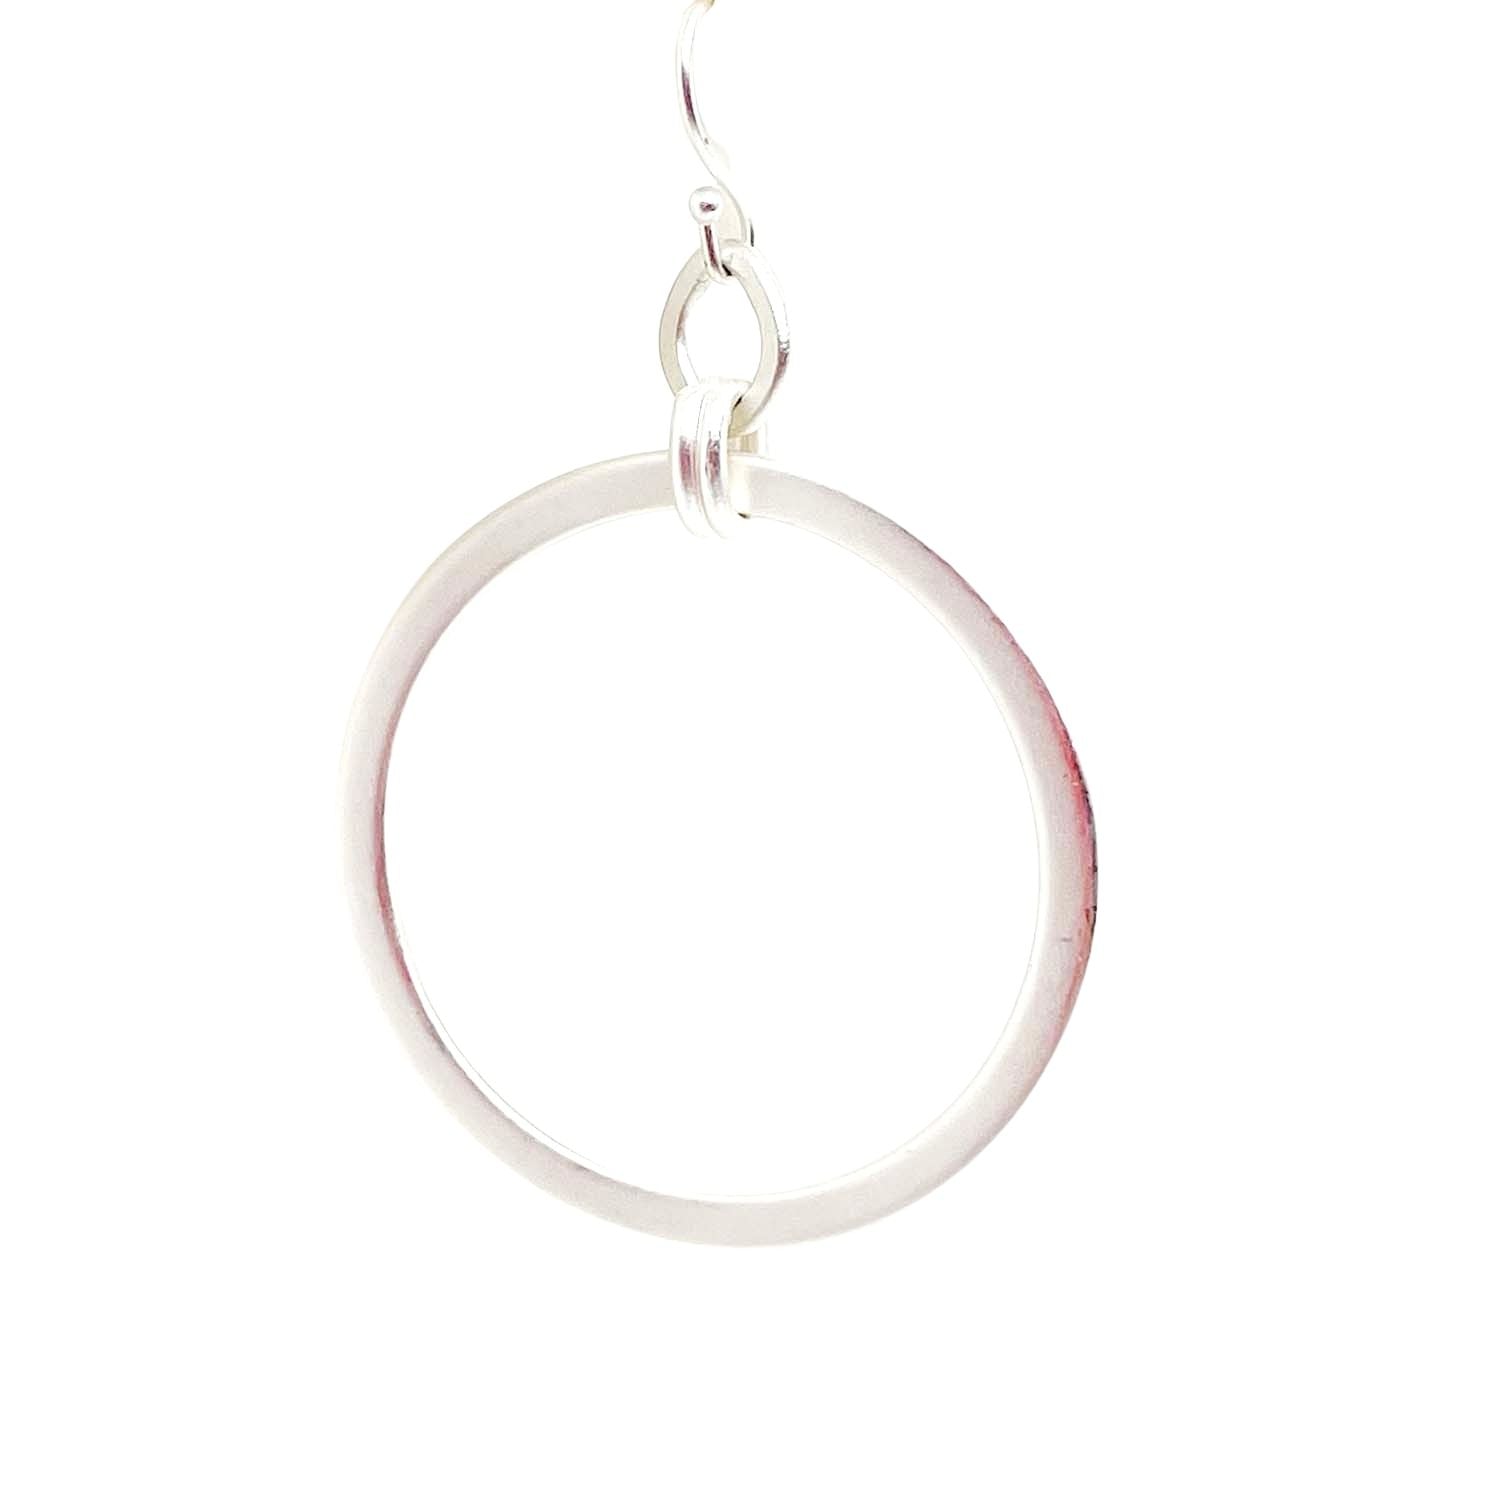 Matte Silver Thick Frosted Oval Hoop Earrings